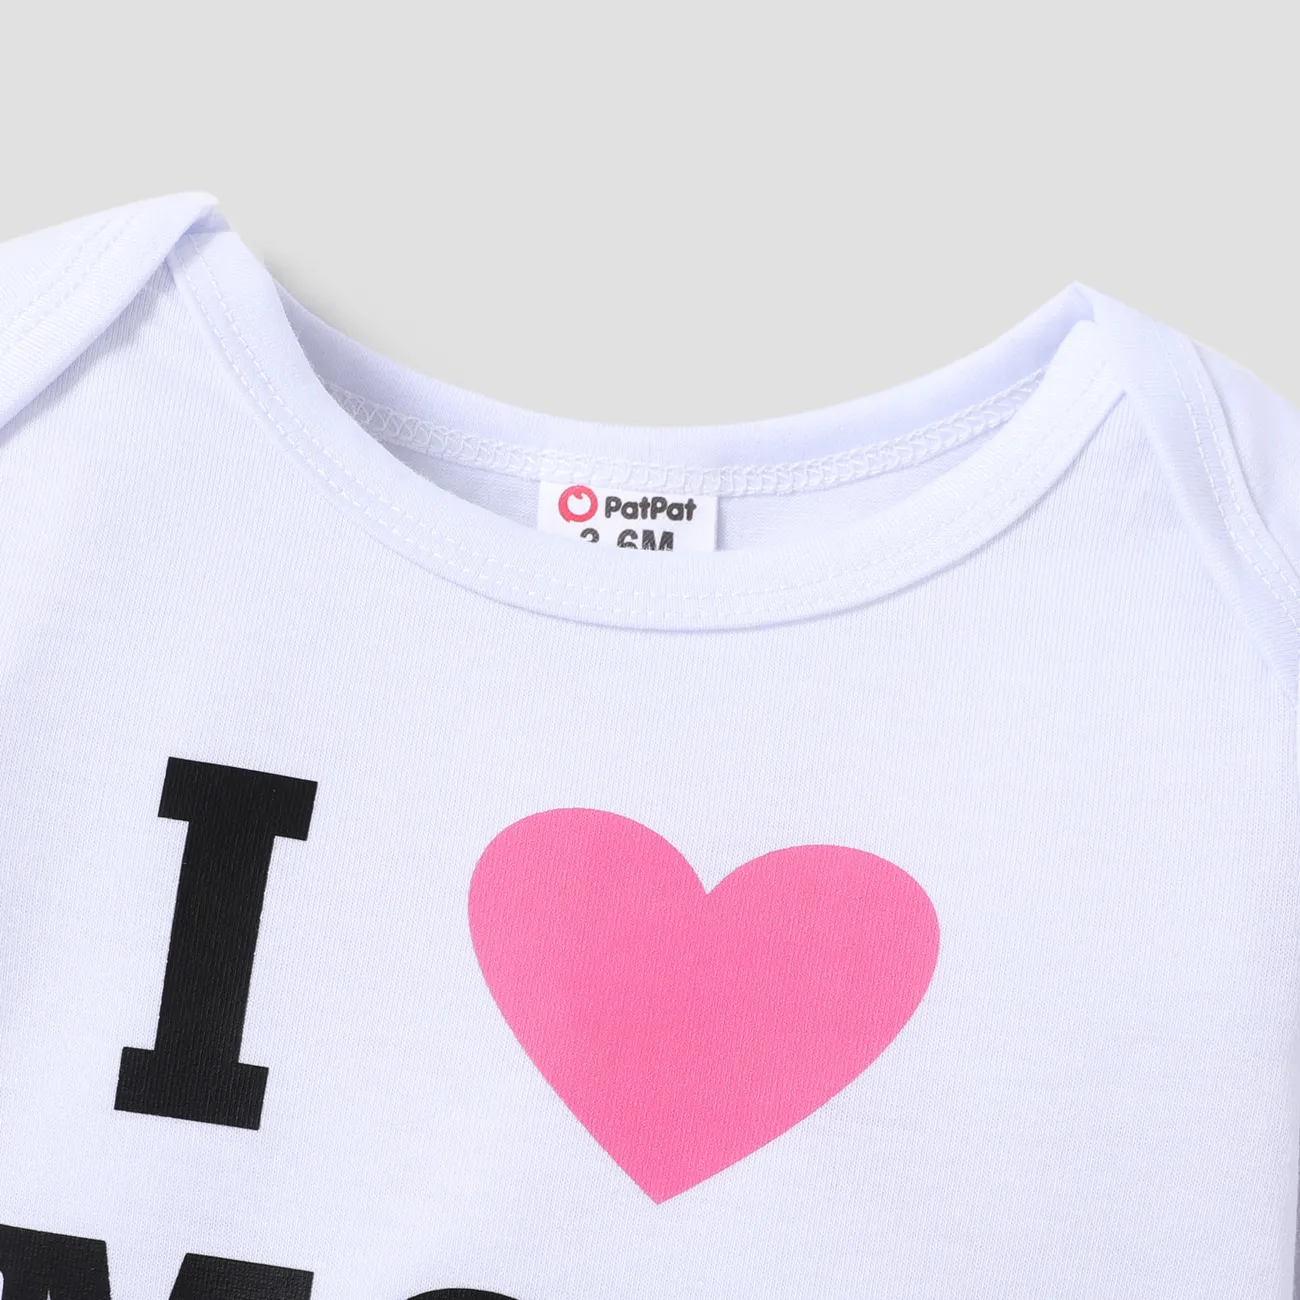 2pcs Baby Girl Love Heart and Letter Print Long-sleeve Romper with Trousers Set White big image 1